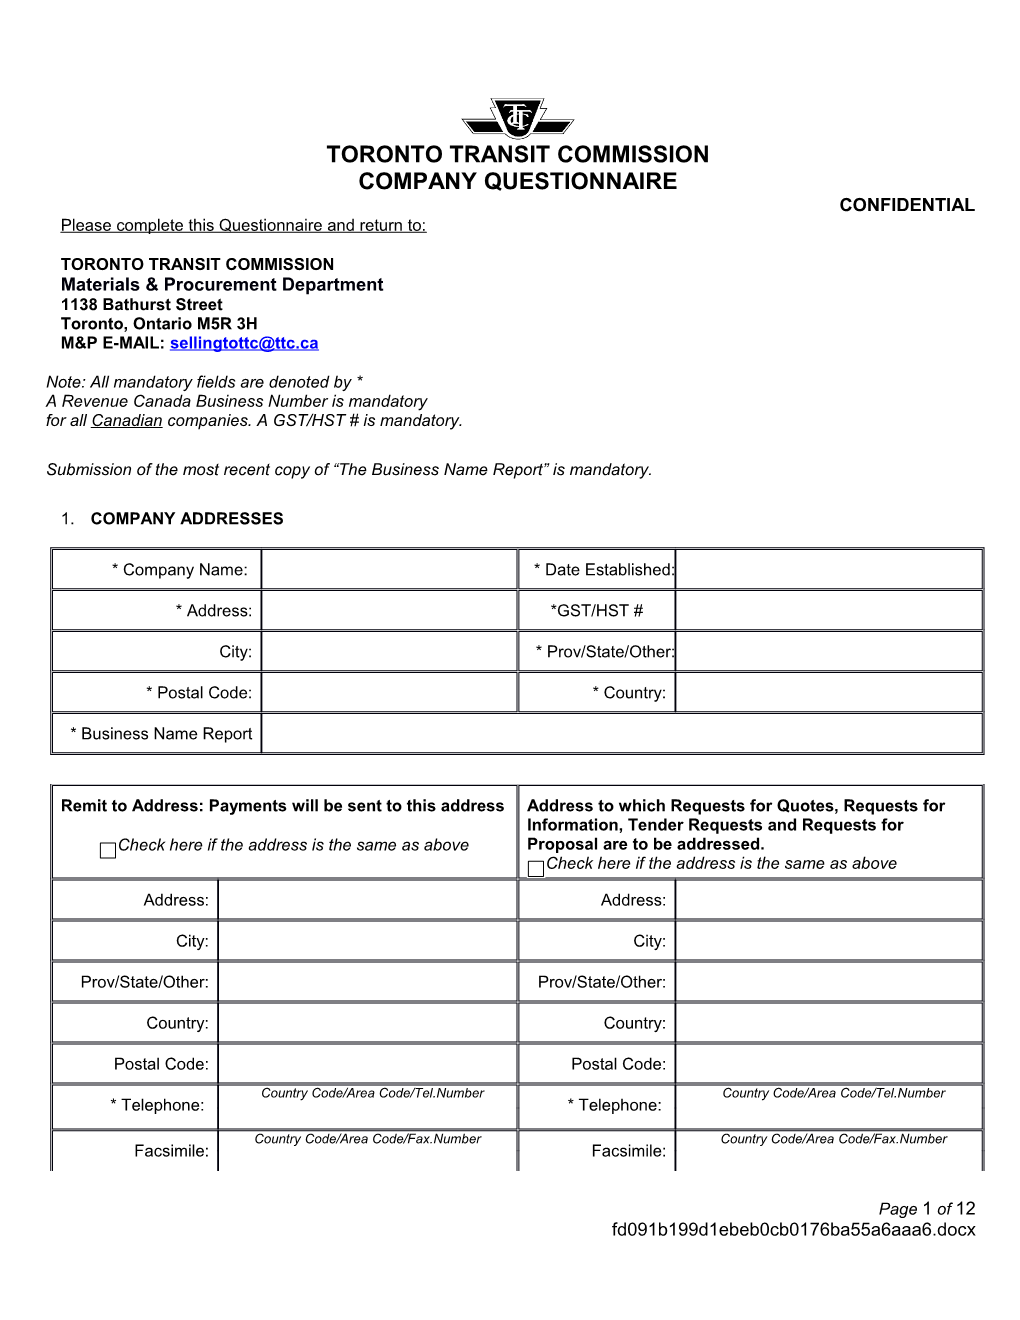 Materials and Procurement Company Questionnaire